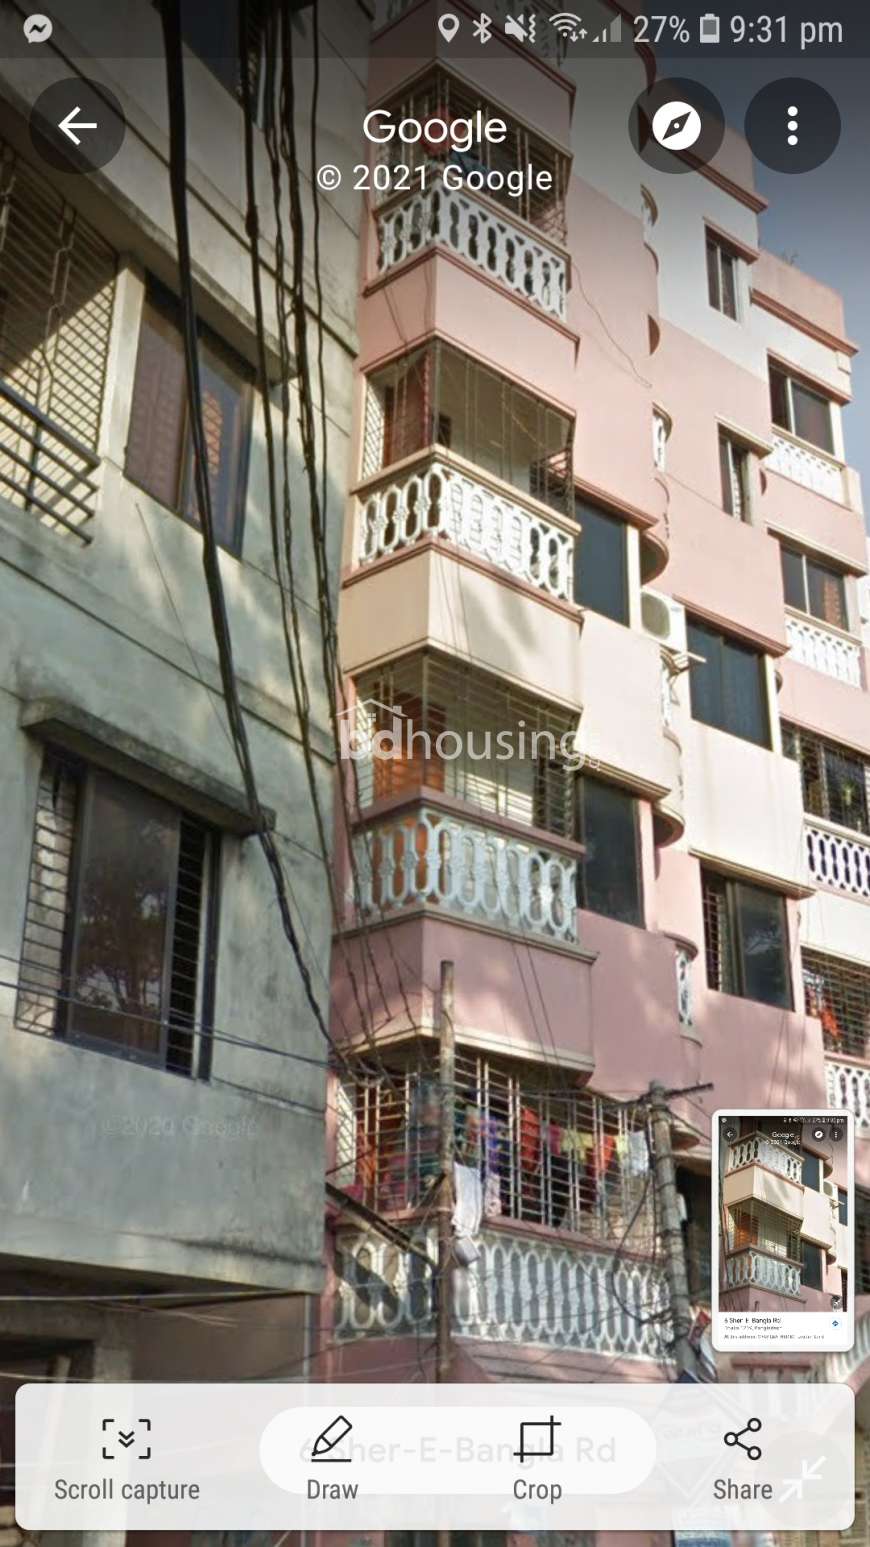 3 large bedroom,  drawing  dining,  kitchen and 3 toilets, 24 hours gas supply facility,electricity and water supply., Apartment/Flats at Hazaribagh